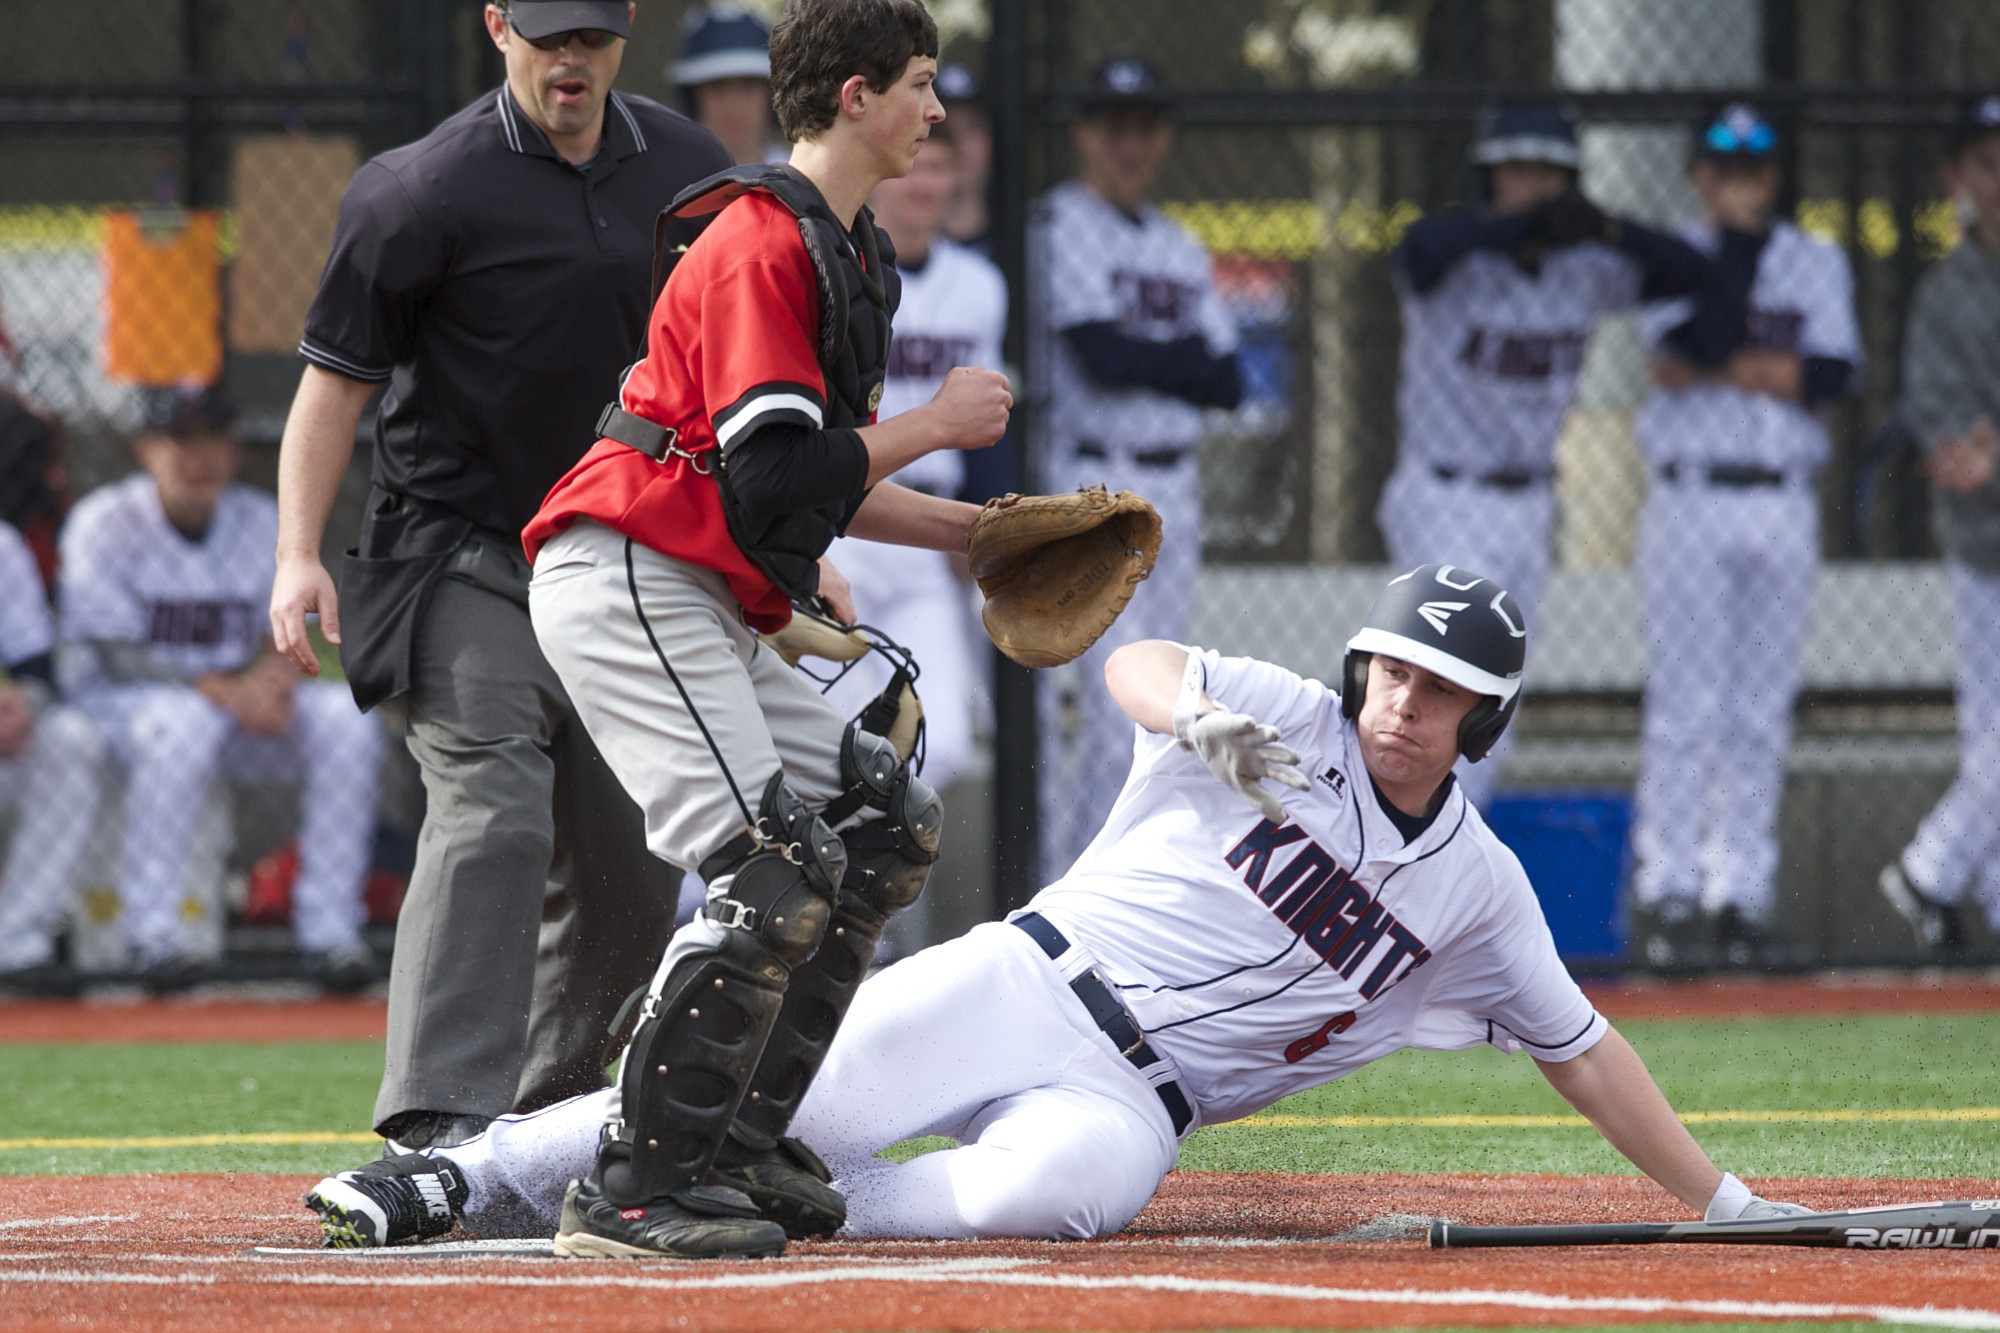 Preston Danberg of King's Way Christian slides home to score in the first game of a doubleheader on the all-weather field at Luke Jensen Sports Park.